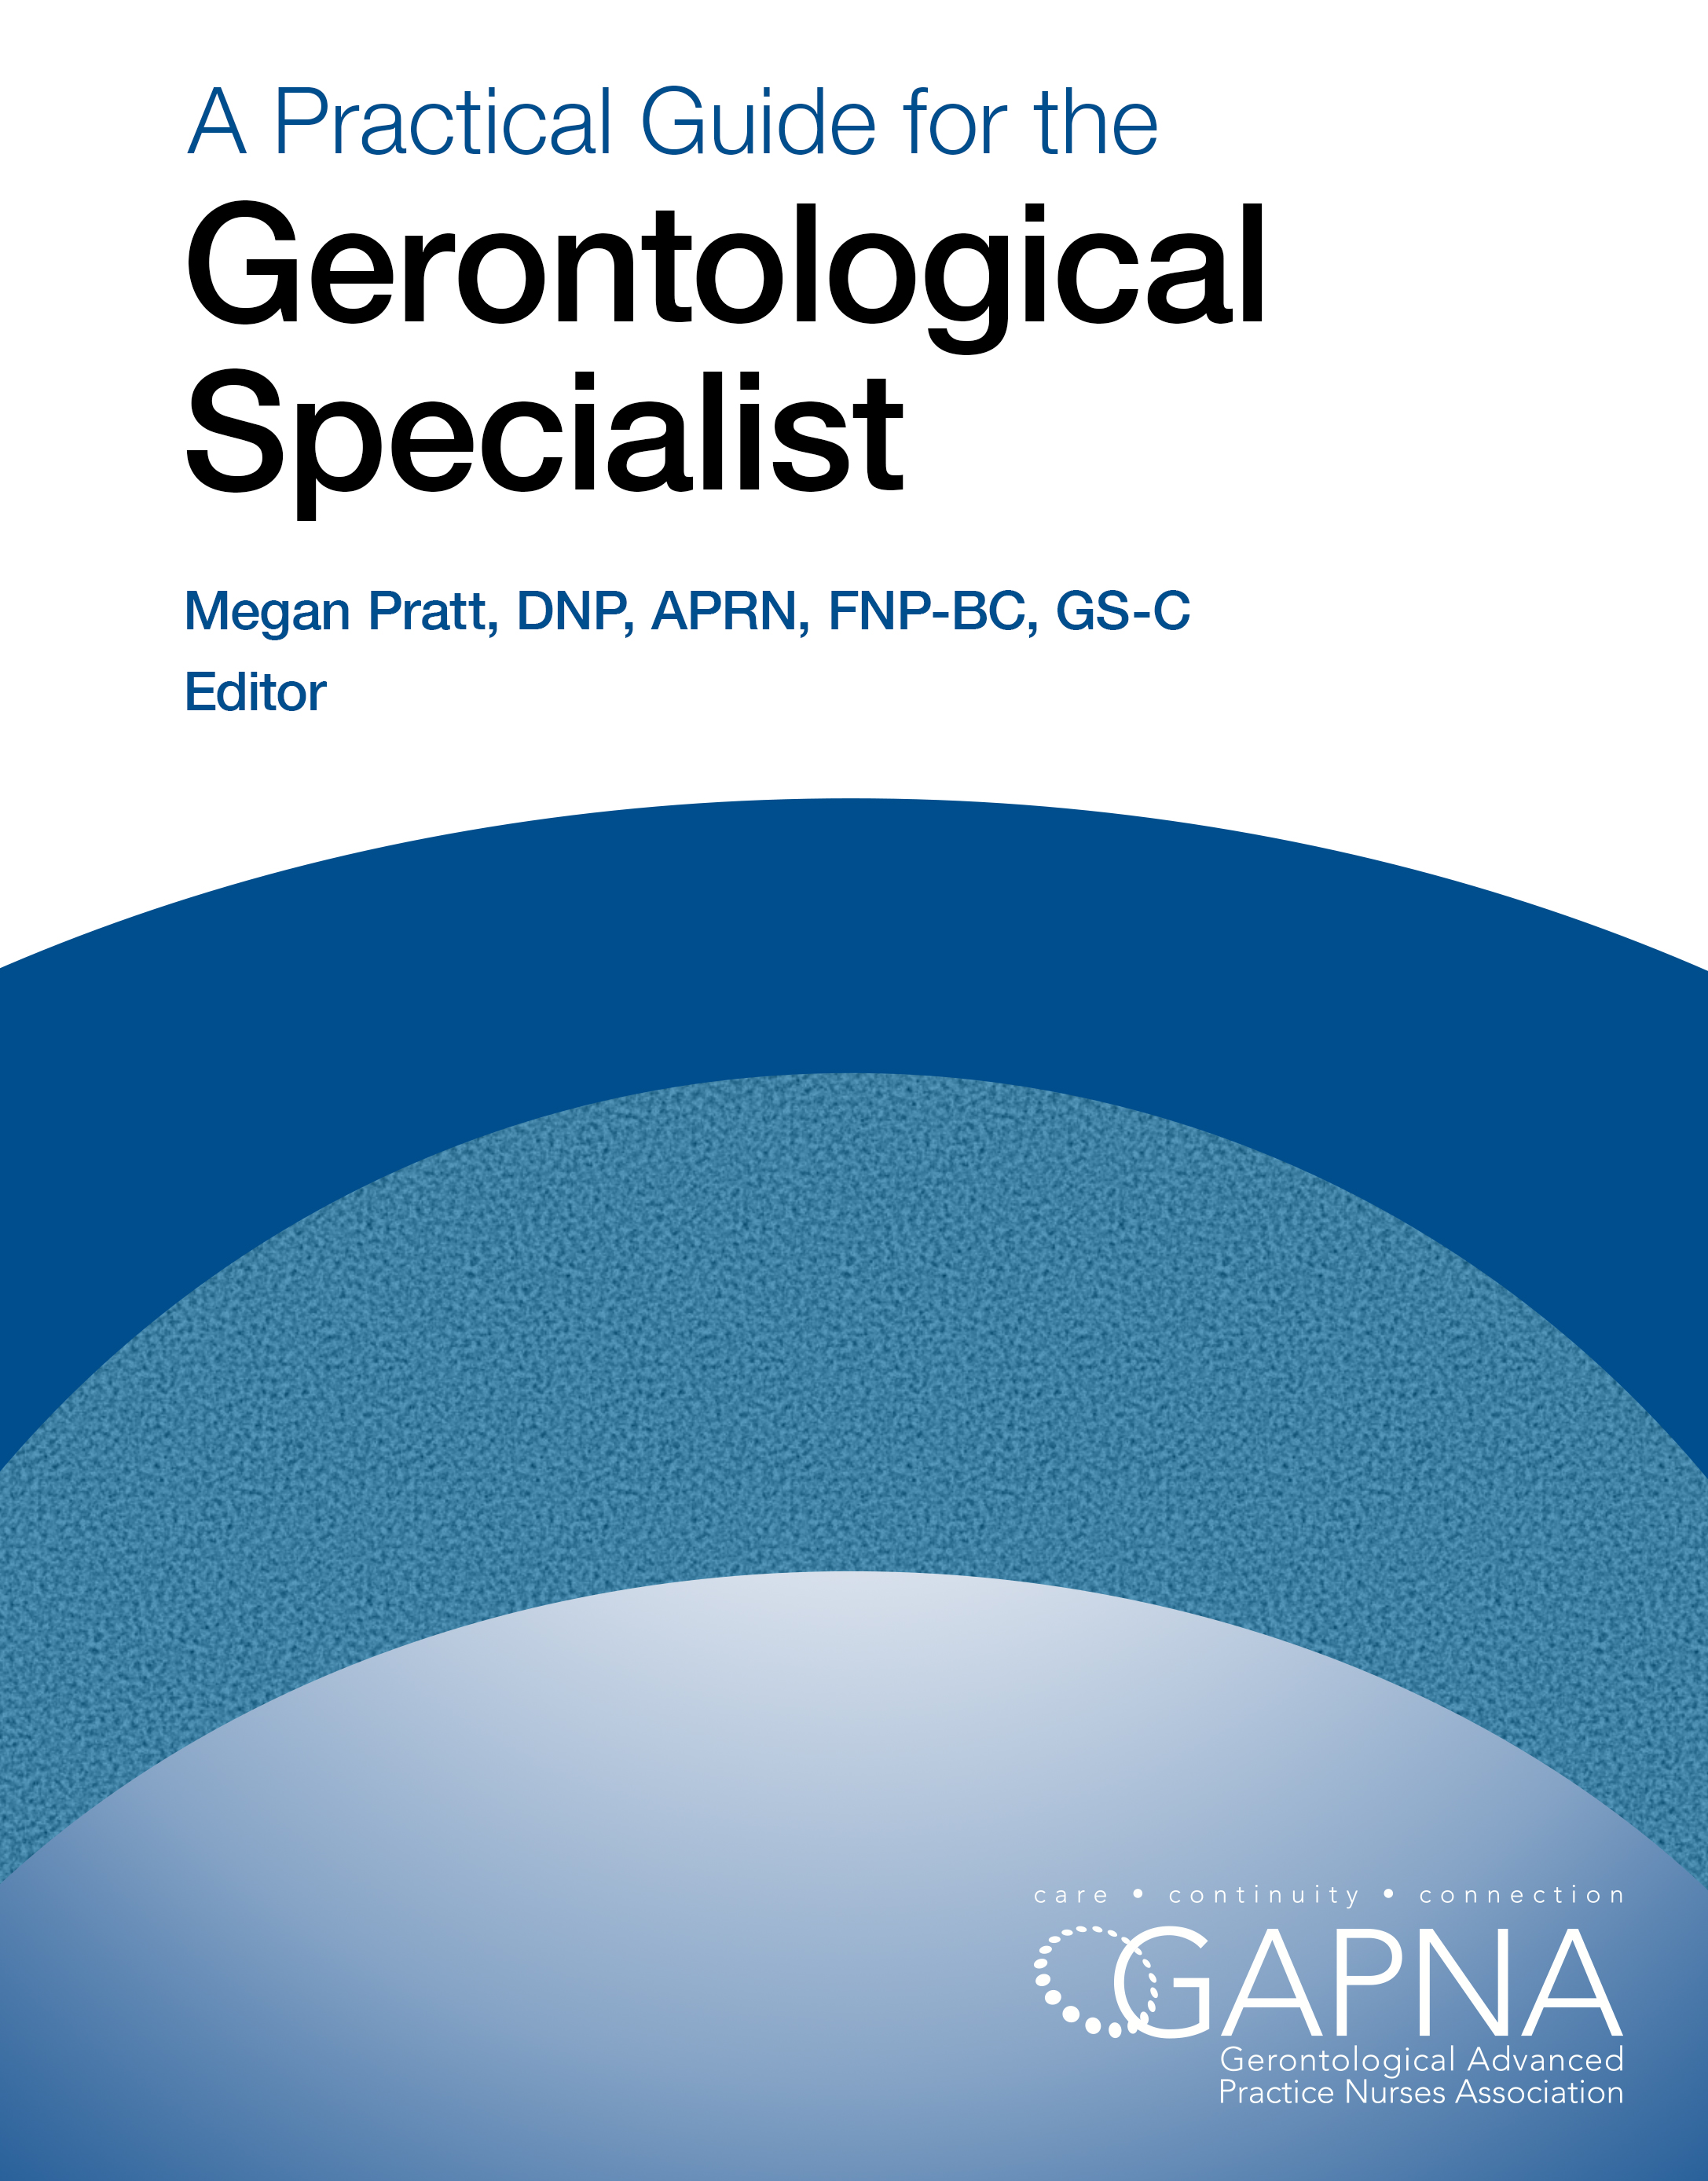 A Practical Guide for the Gerontological Specialist, 2022